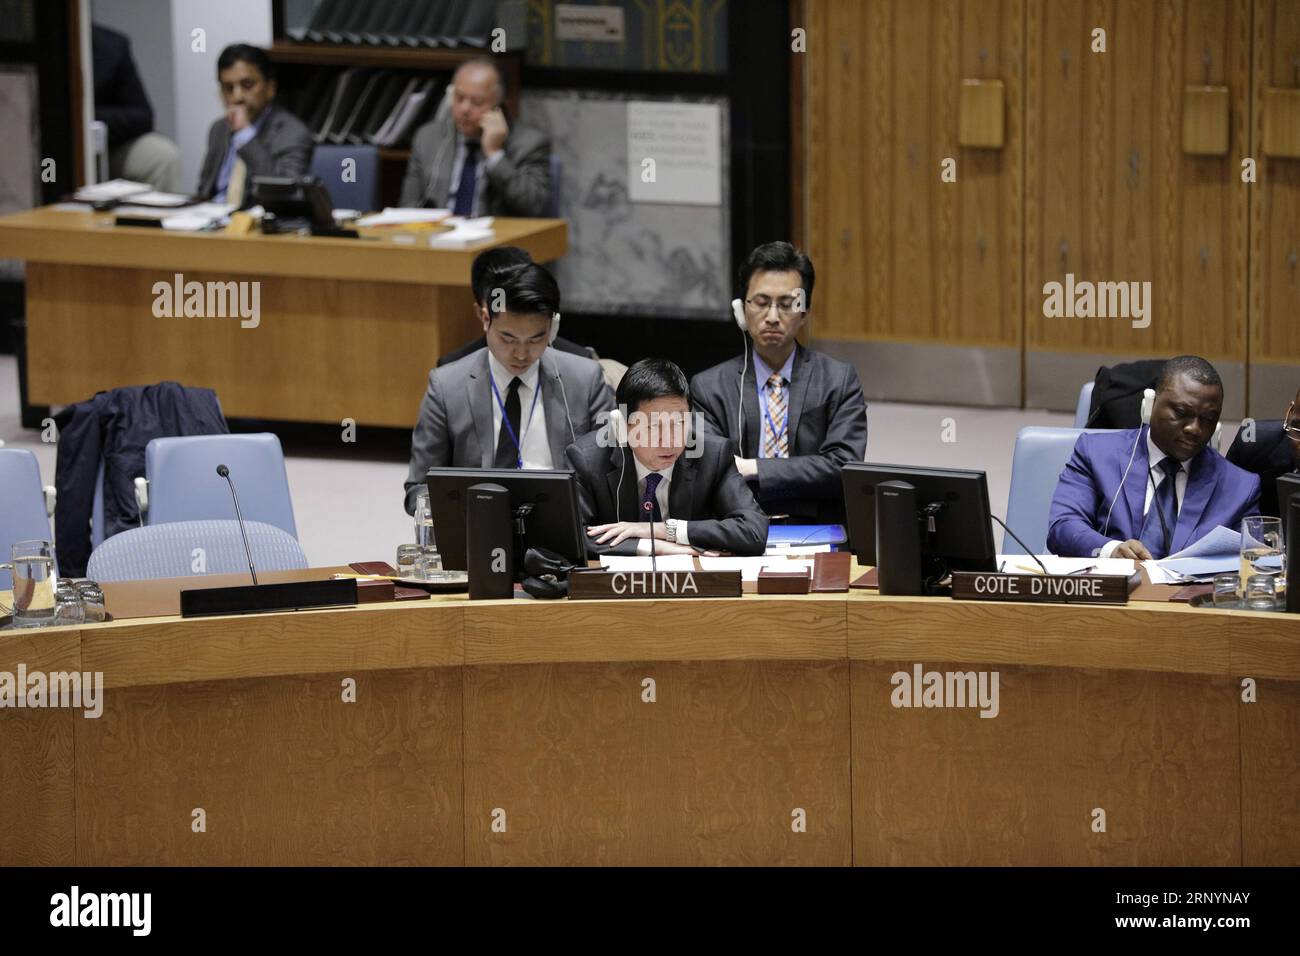 (180327) -- UNITED NATIONS, March 27, 2018 -- China s deputy permanent representative to the United Nations Wu Haitao (L, front) addresses a United Nations Security Council meeting on the humanitarian situation in Syria, at the UN headquarters in New York, March 27, 2018. UN Undersecretary-General for Humanitarian Affairs and Emergency Relief Coordinator Mark Lowcock said Tuesday that the last few months have been some of the worst for Syrian civilians as a result of ongoing violence. ) UN-SECURITY COUNCIL-SYRIA-HUMANITARIAN SITUATION LixMuzi PUBLICATIONxNOTxINxCHN Stock Photo